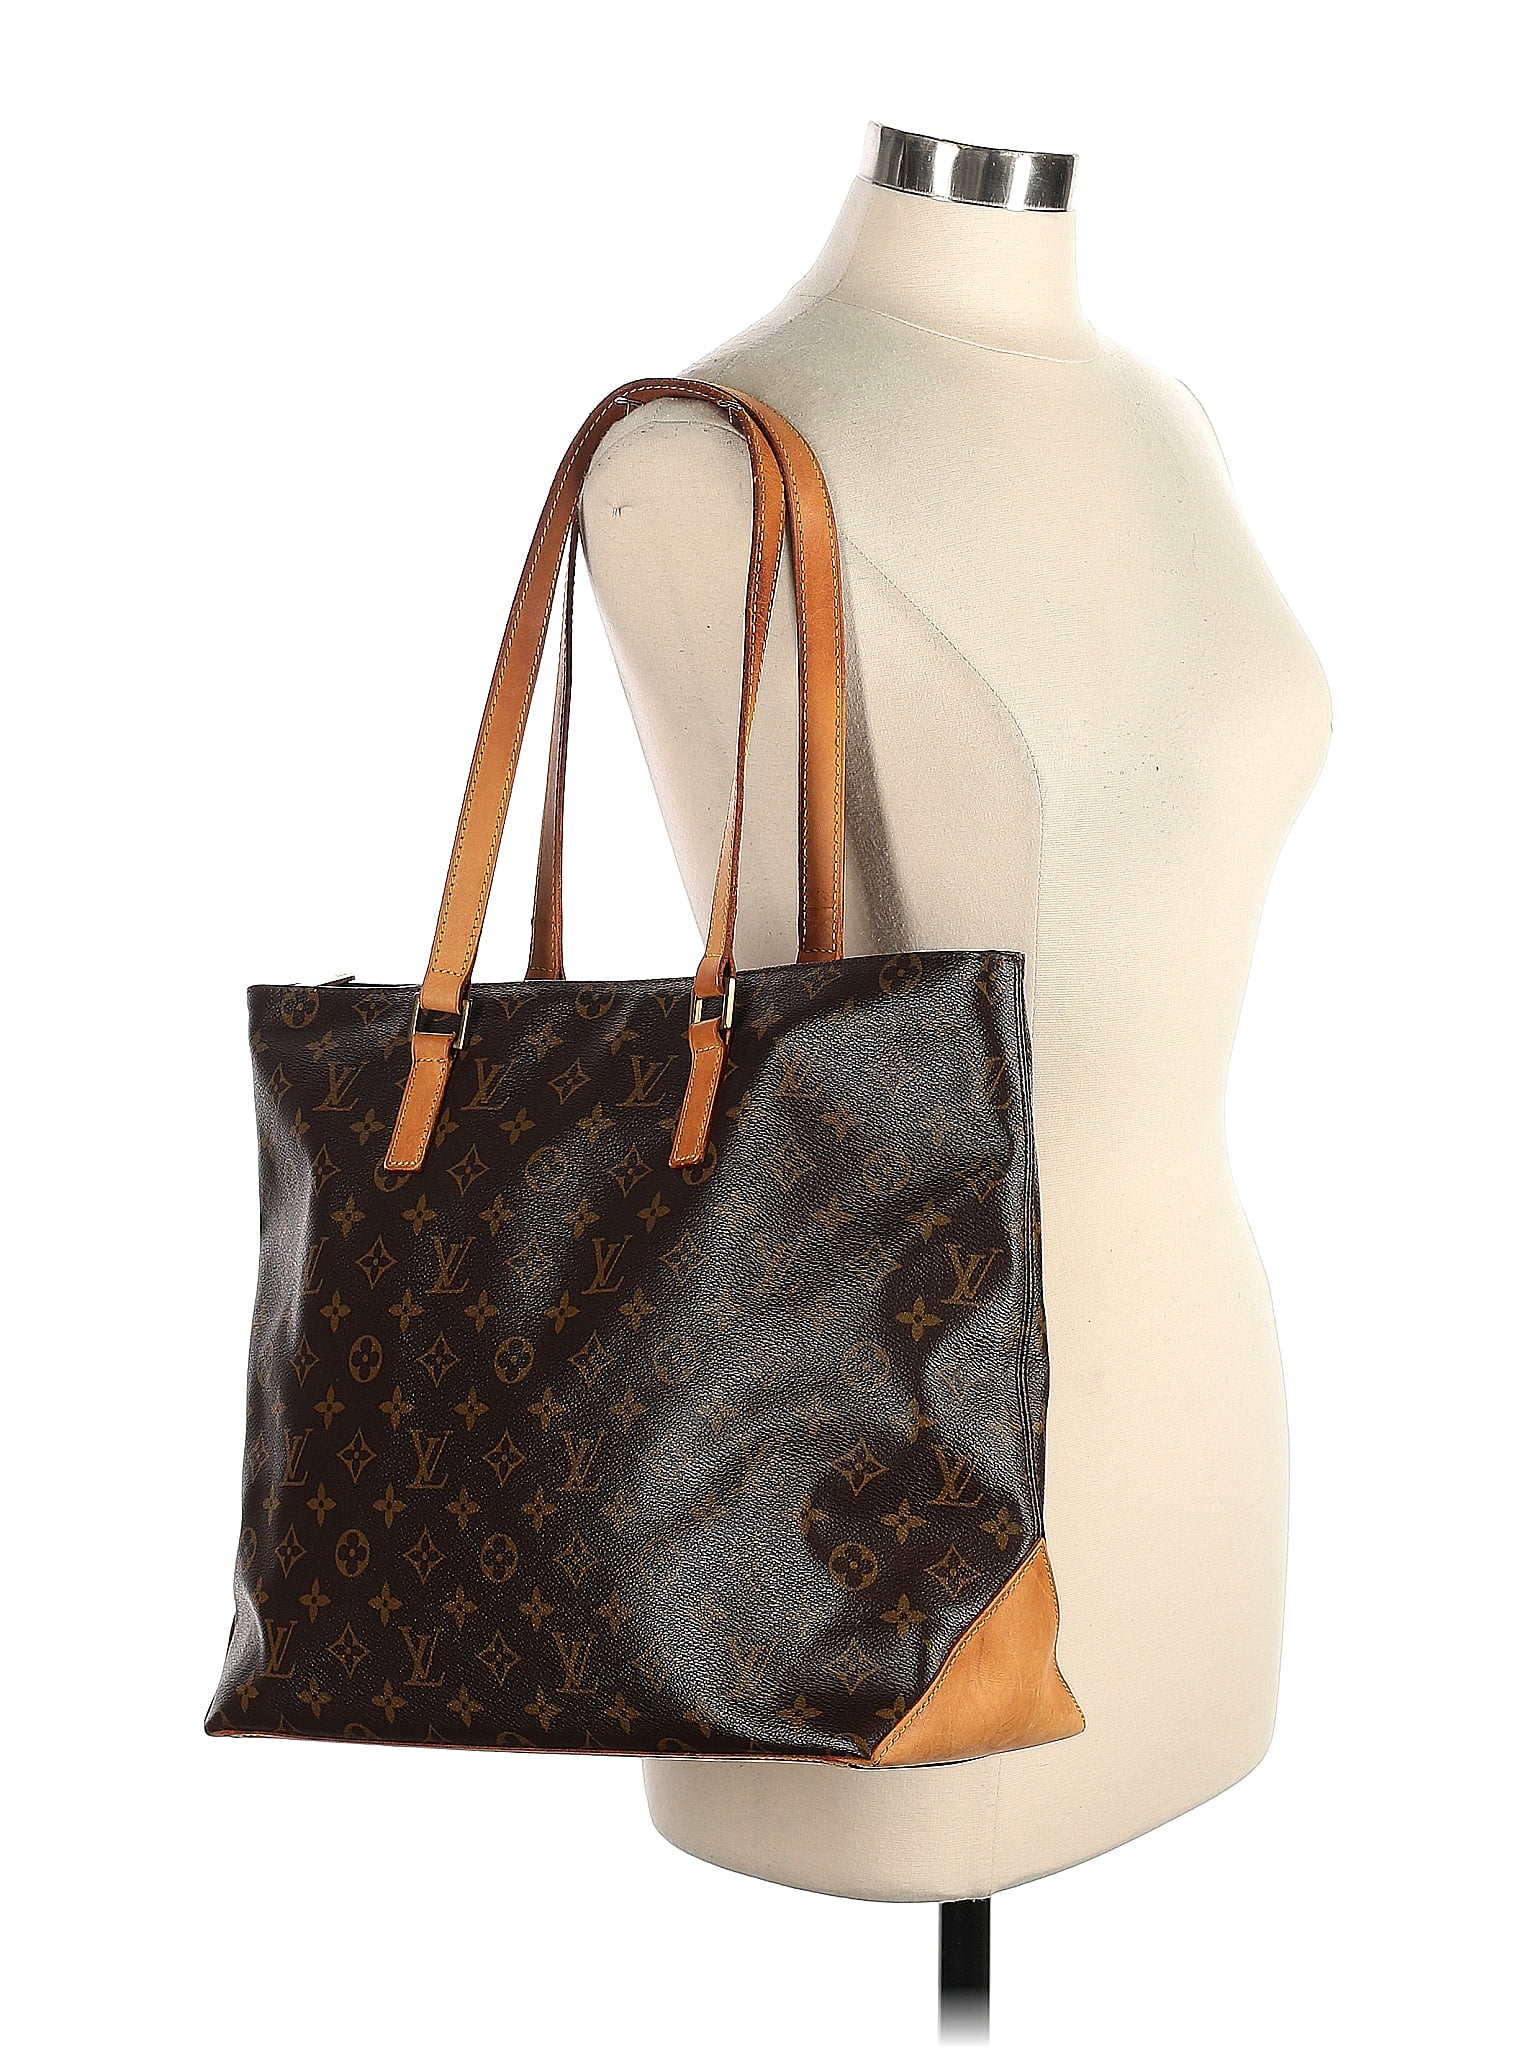 Lot - Louis Vuitton 'Marly' Epi Leather Tote Bag